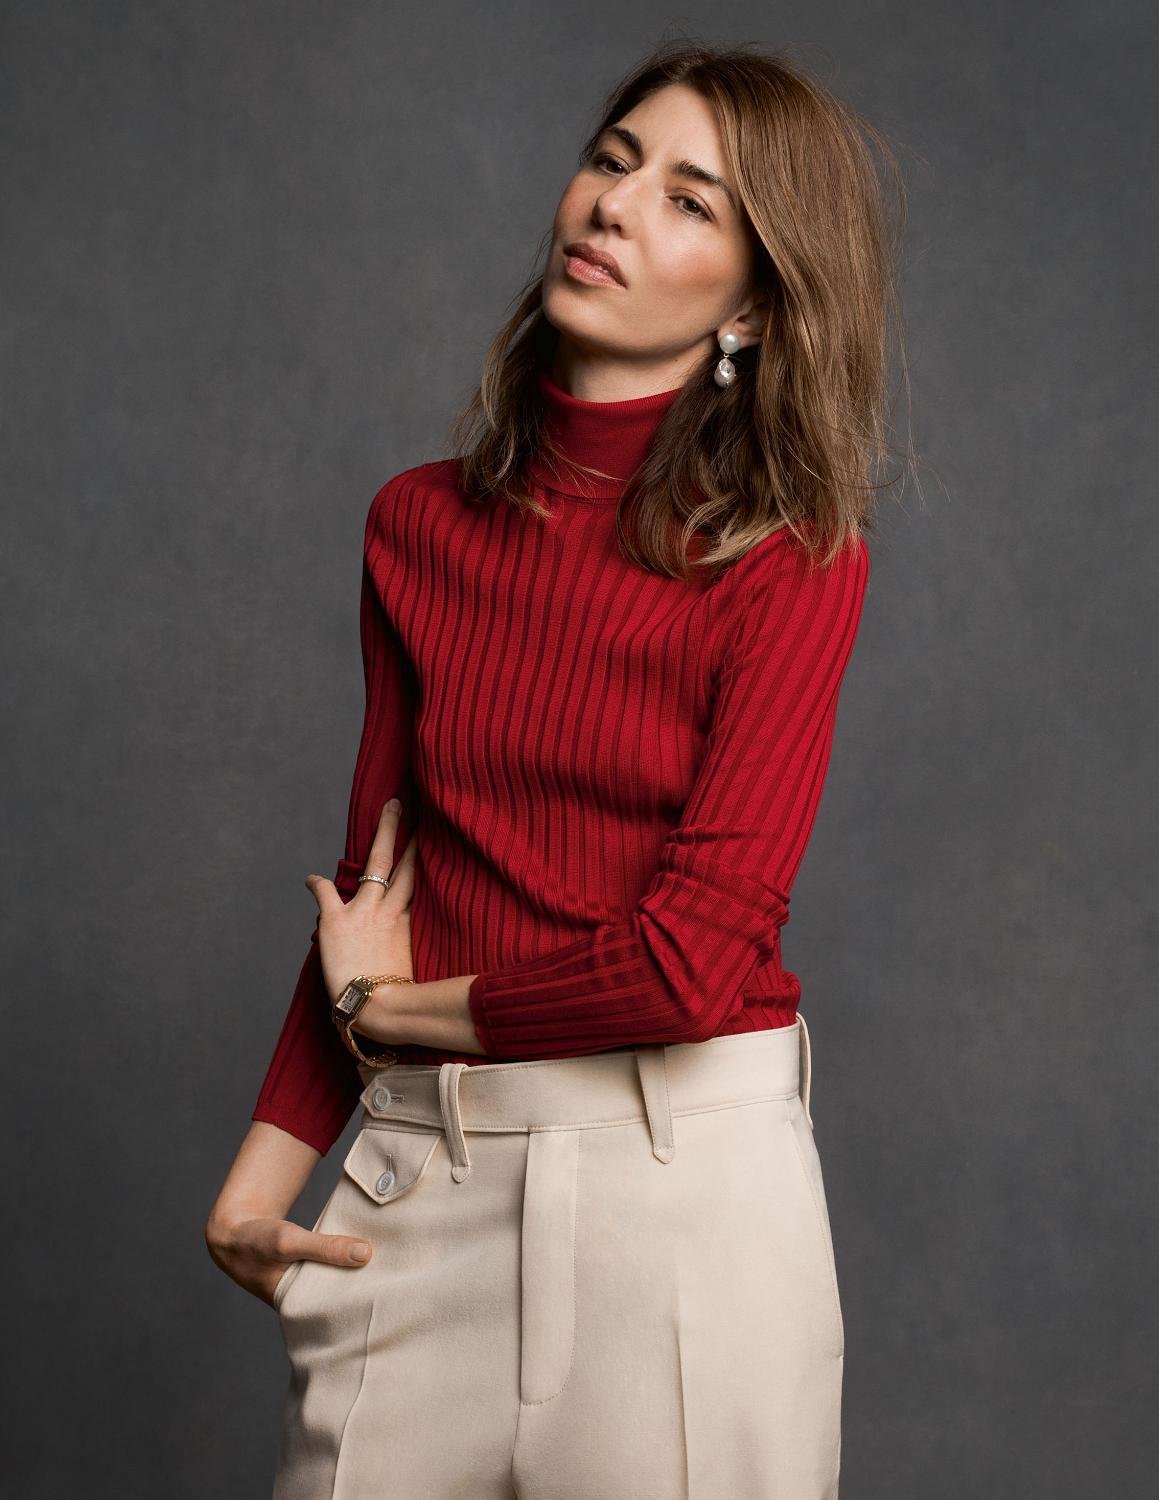 How Sofia Coppola has perfected her signature style